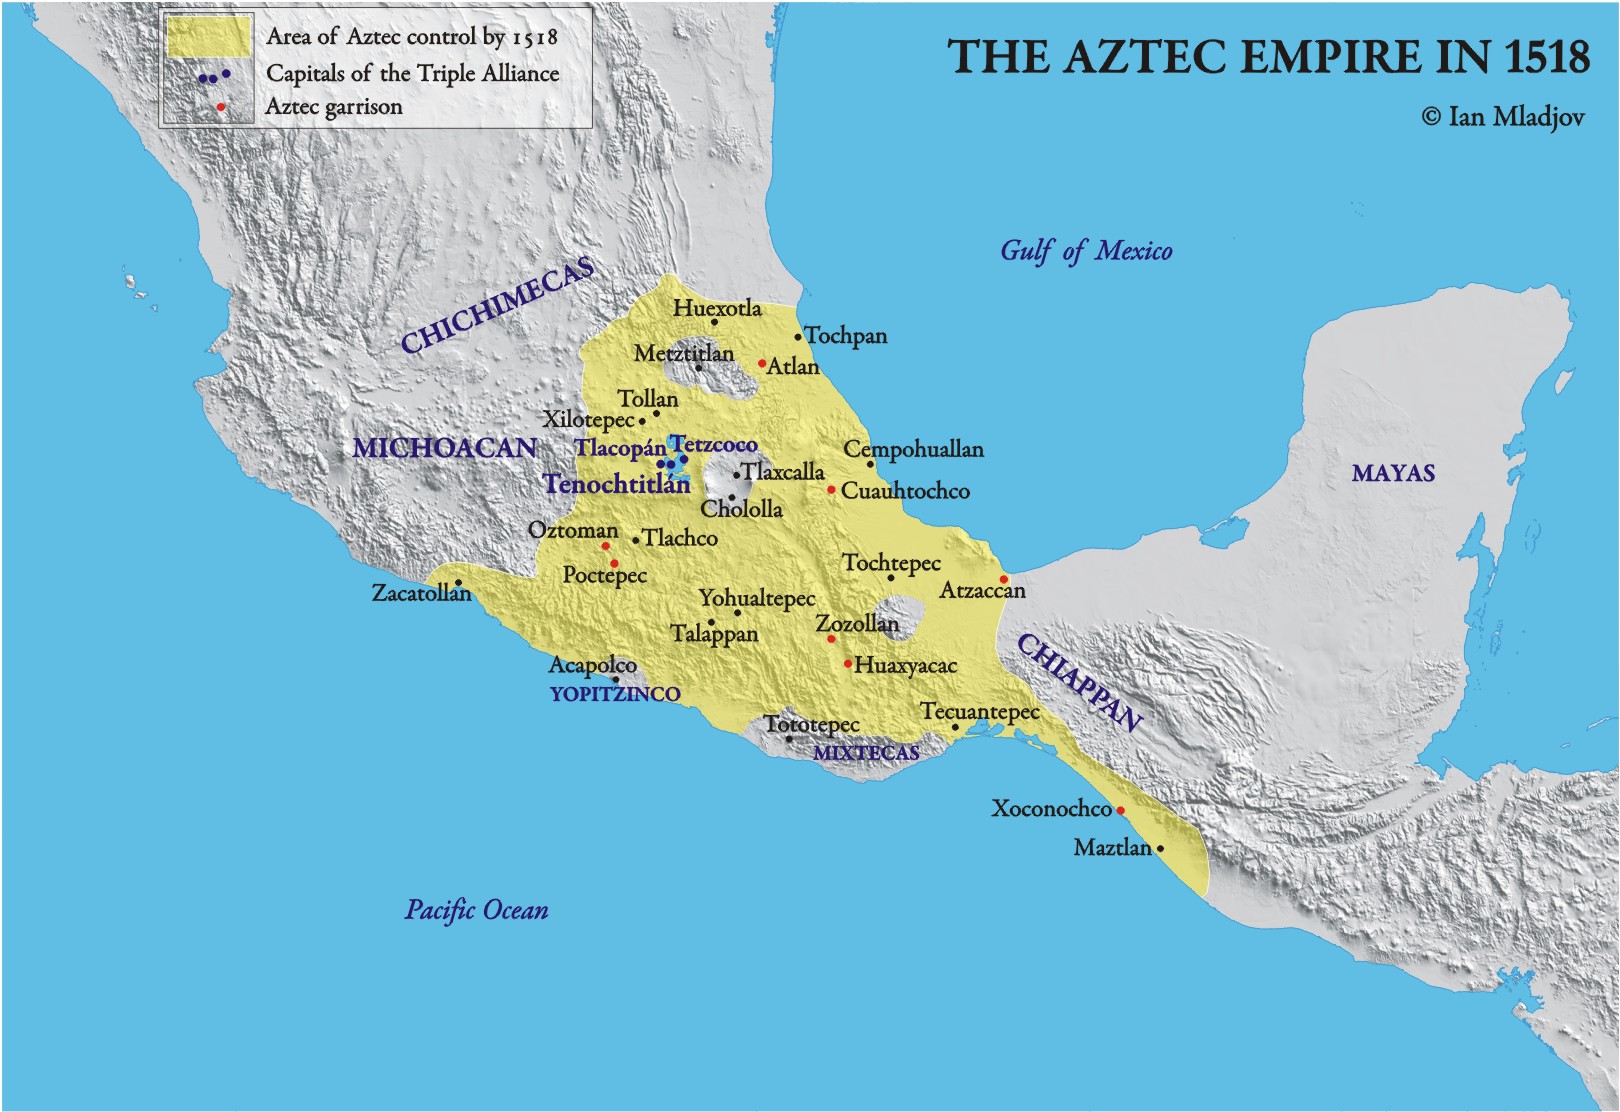 Map Of The Aztec Empire In 1519 Ce Pearltrees